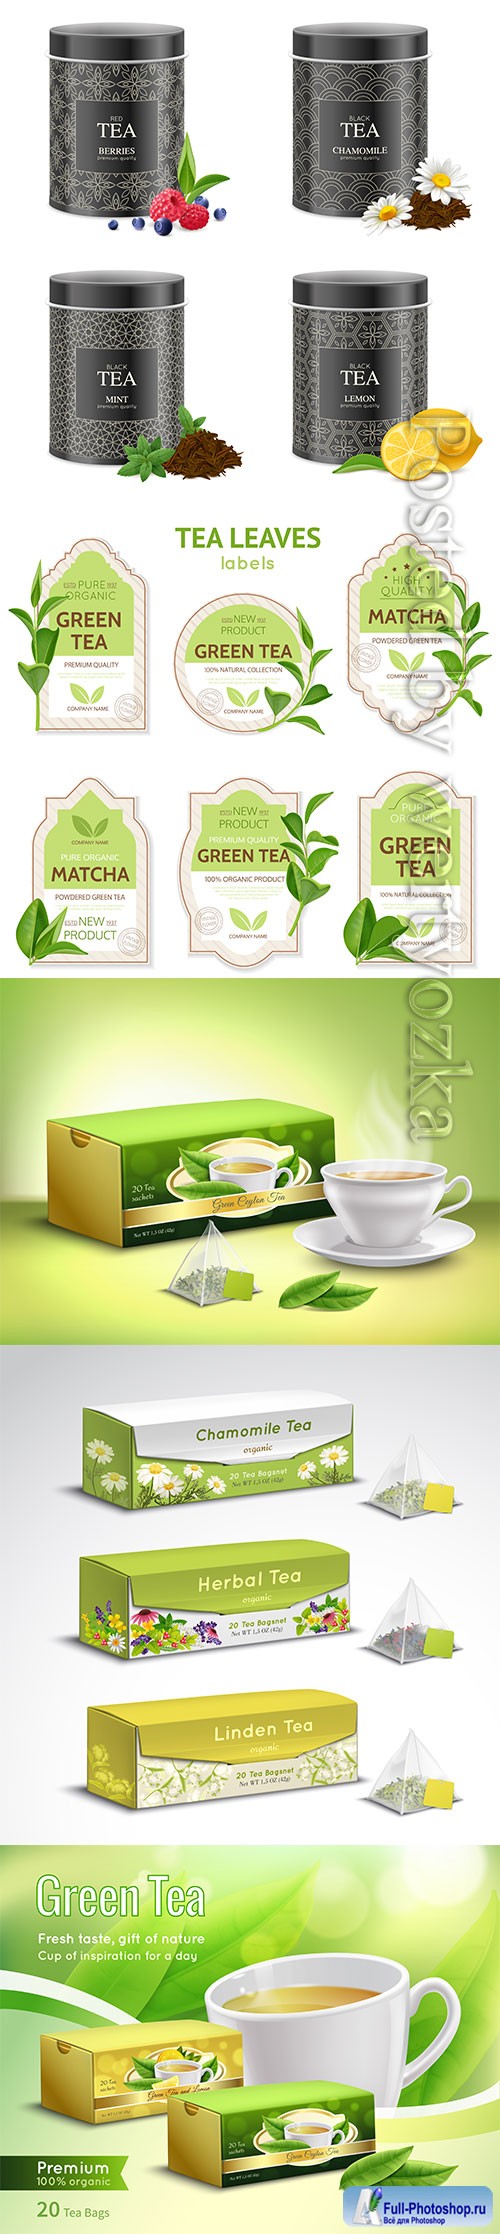 Tea and packaging vector illustration